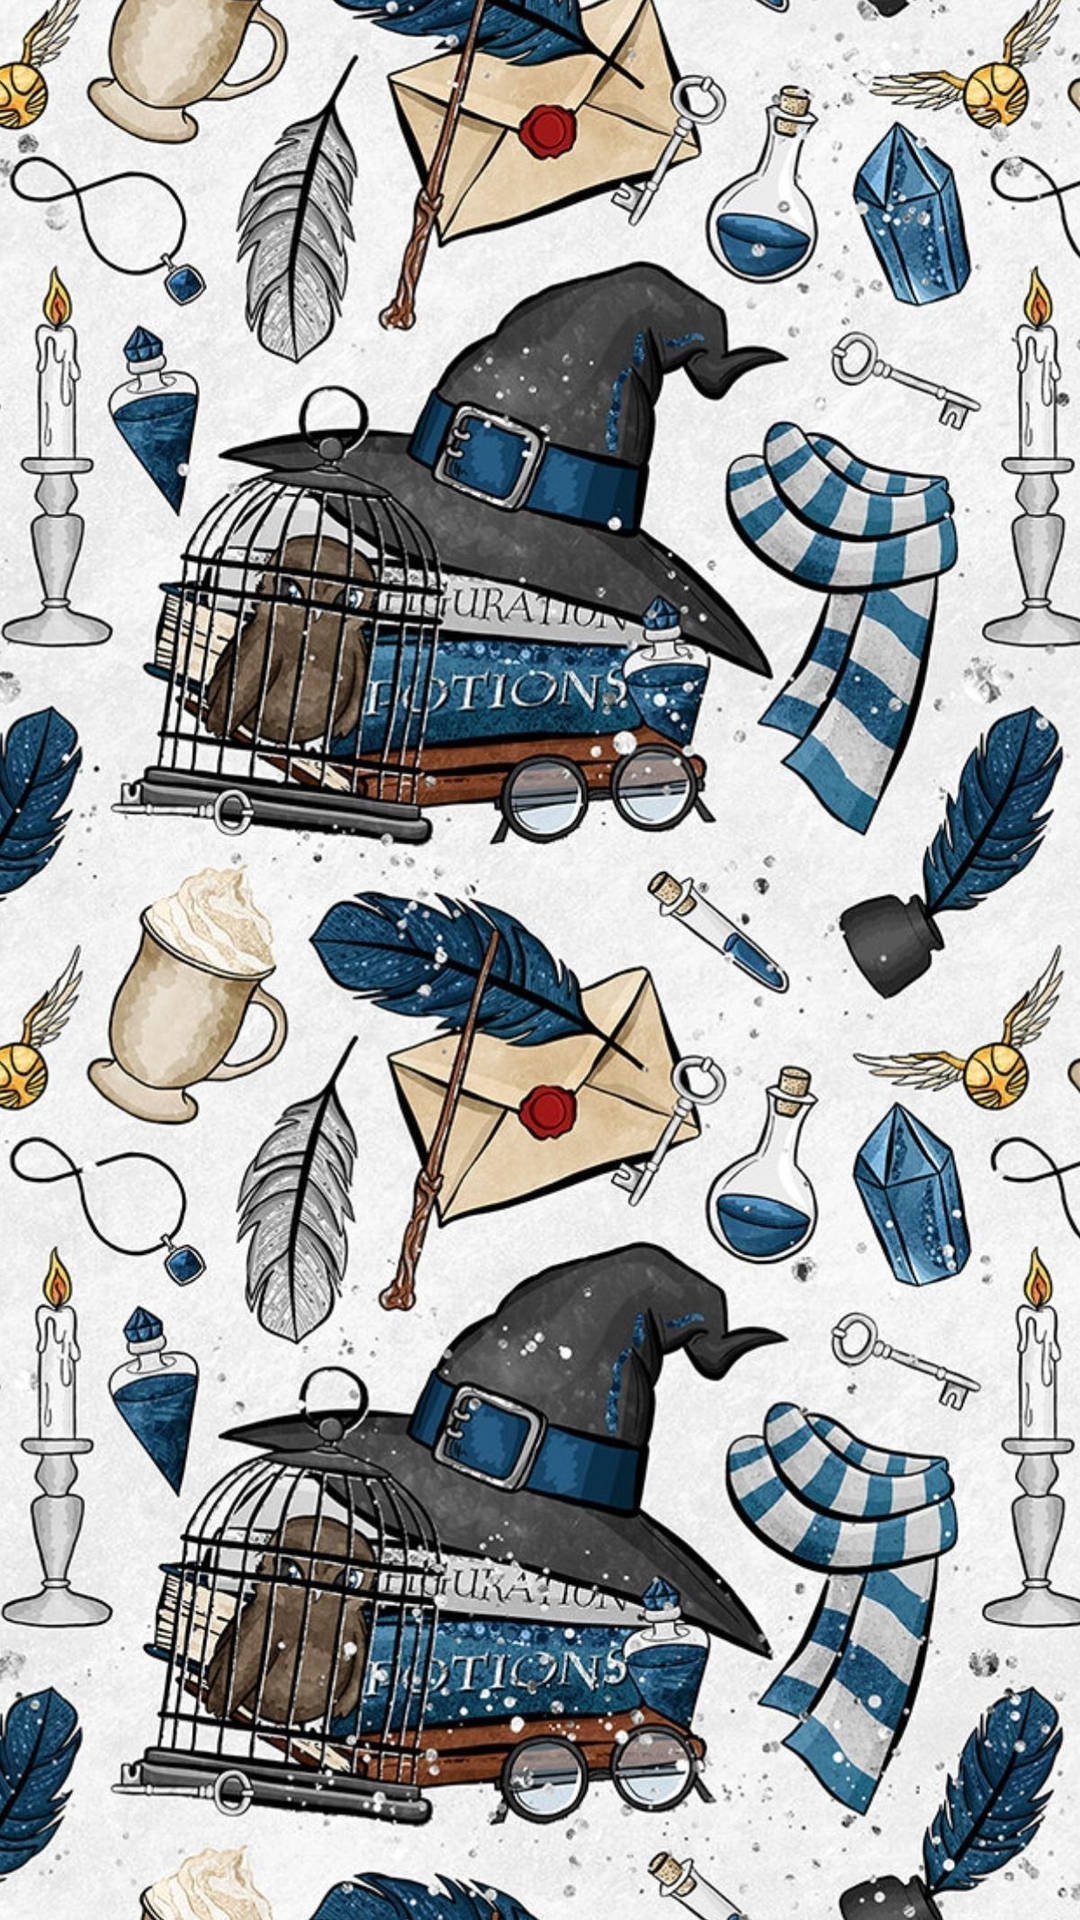 100+] Cute Harry Potter Pictures | Wallpapers.com